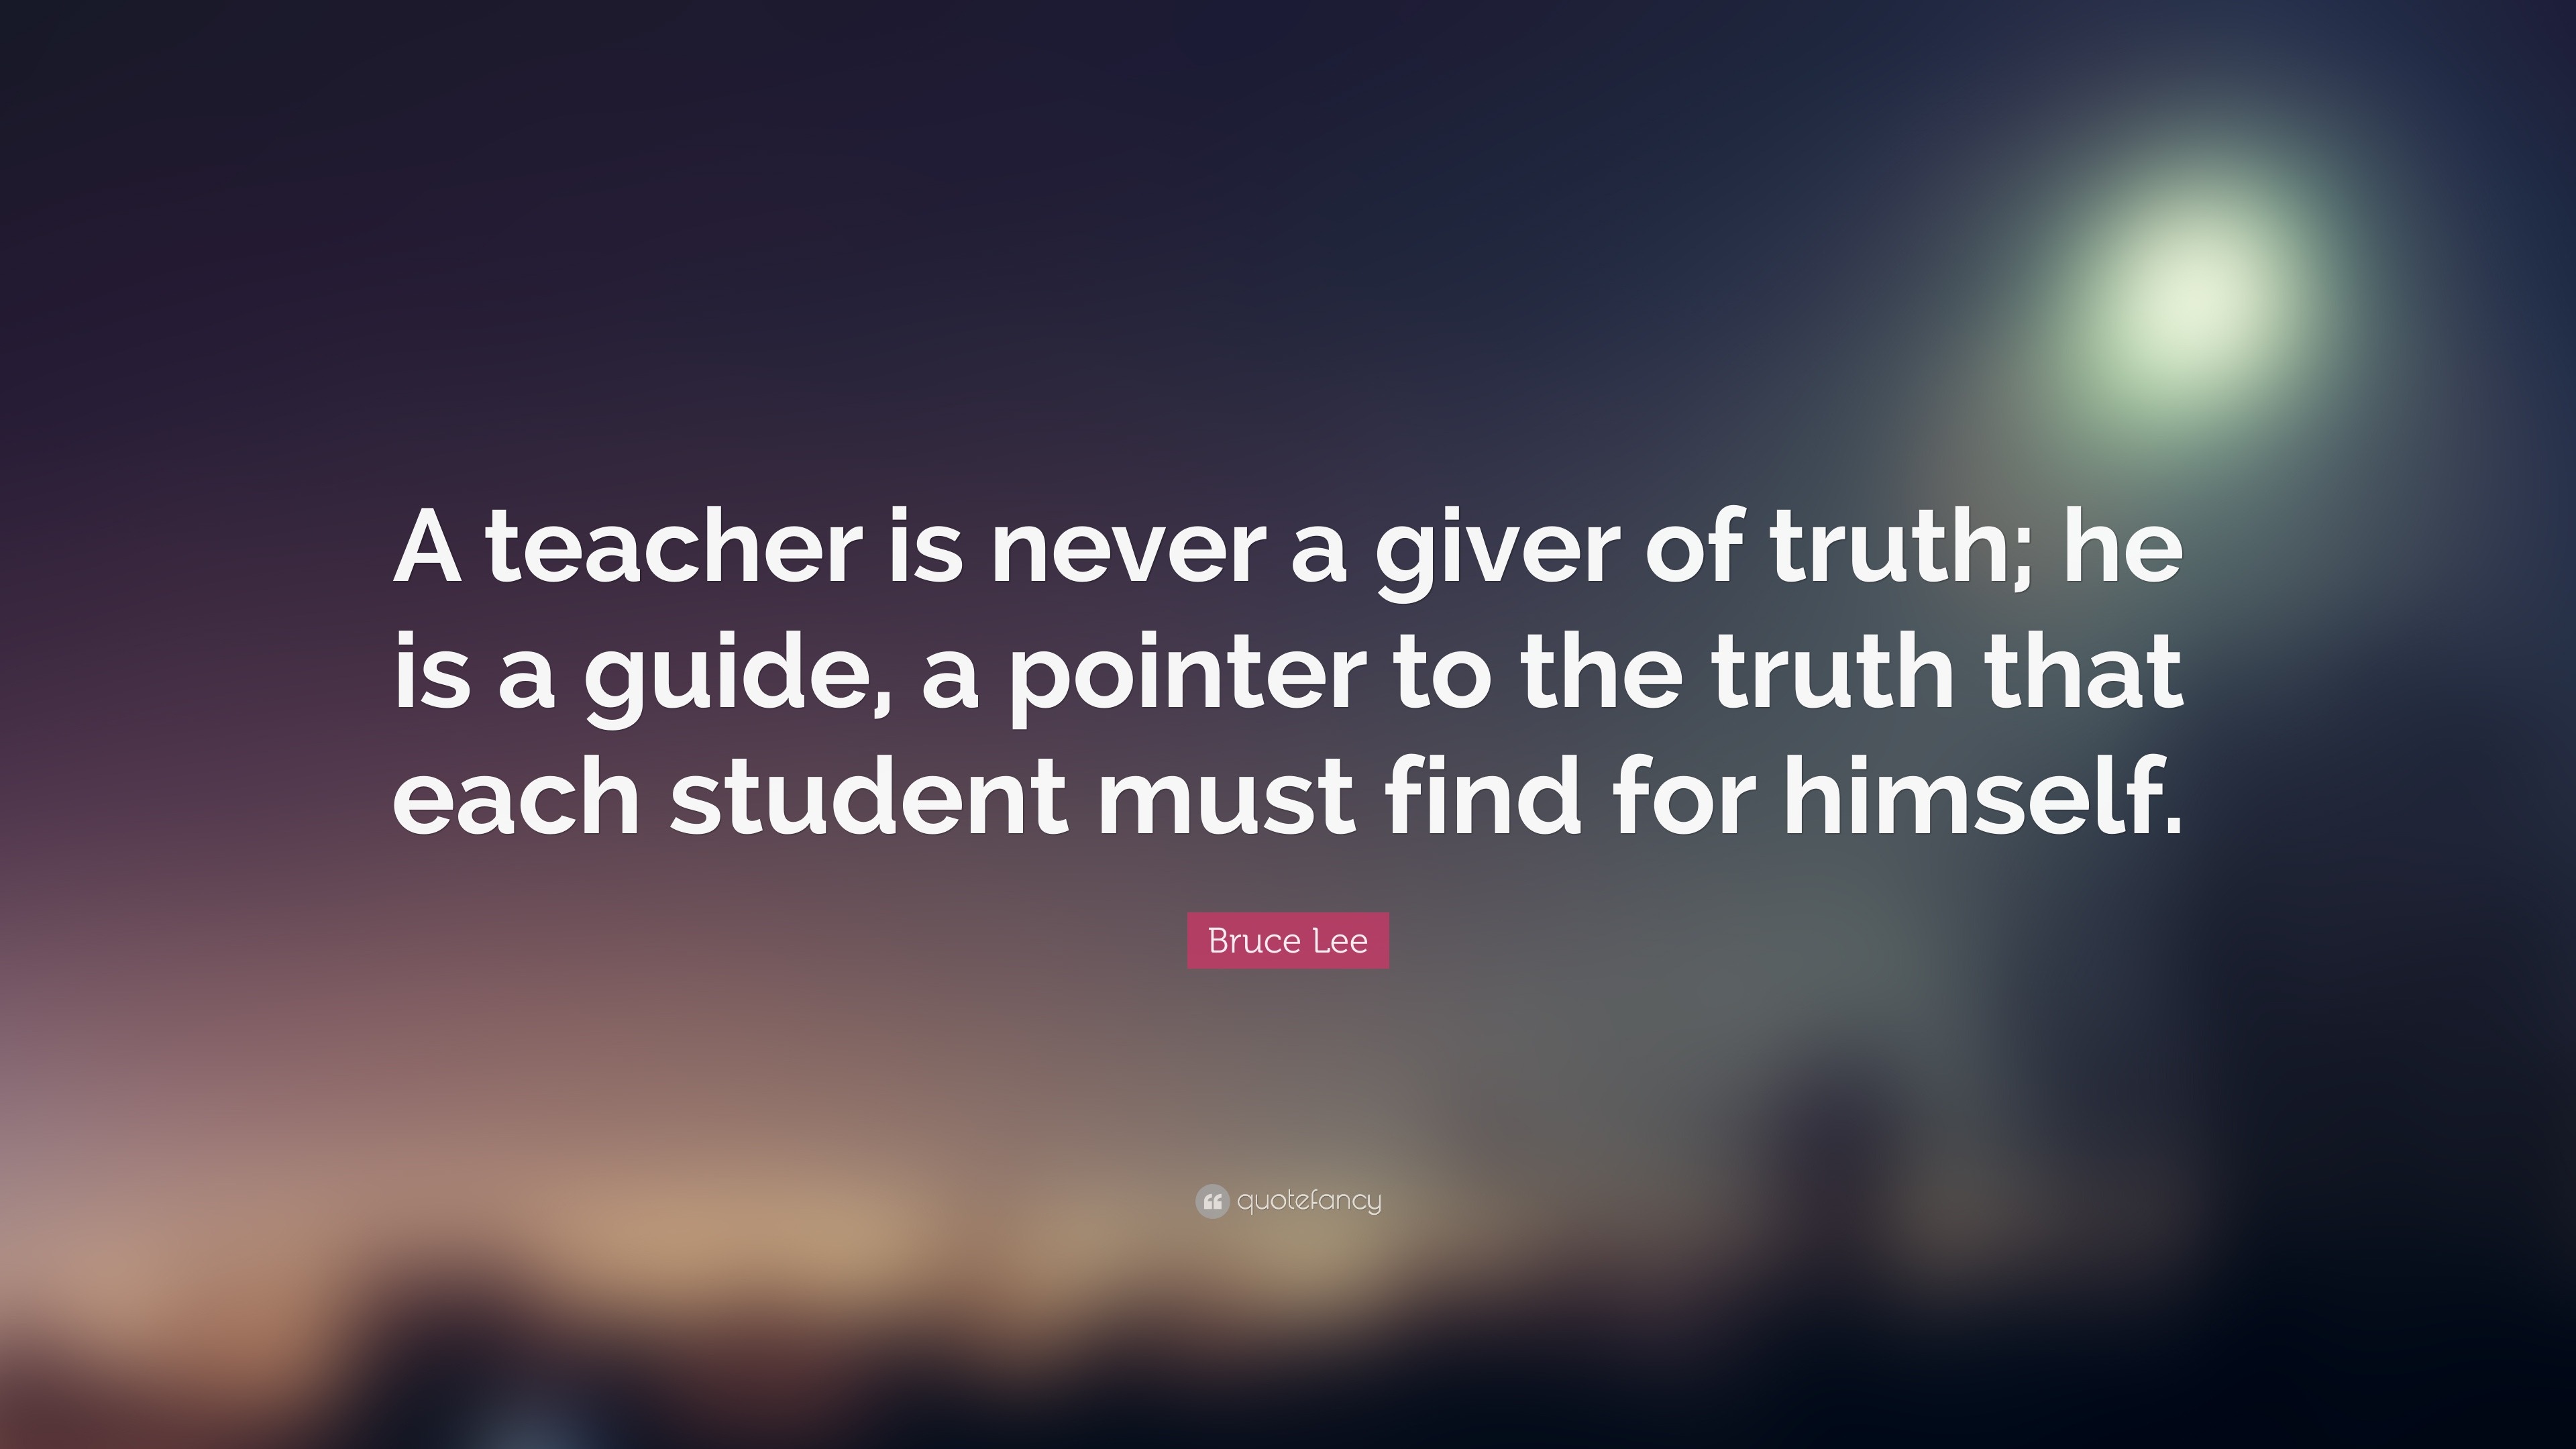 Bruce Lee Quote: “A teacher is never a giver of truth; he is a guide, a